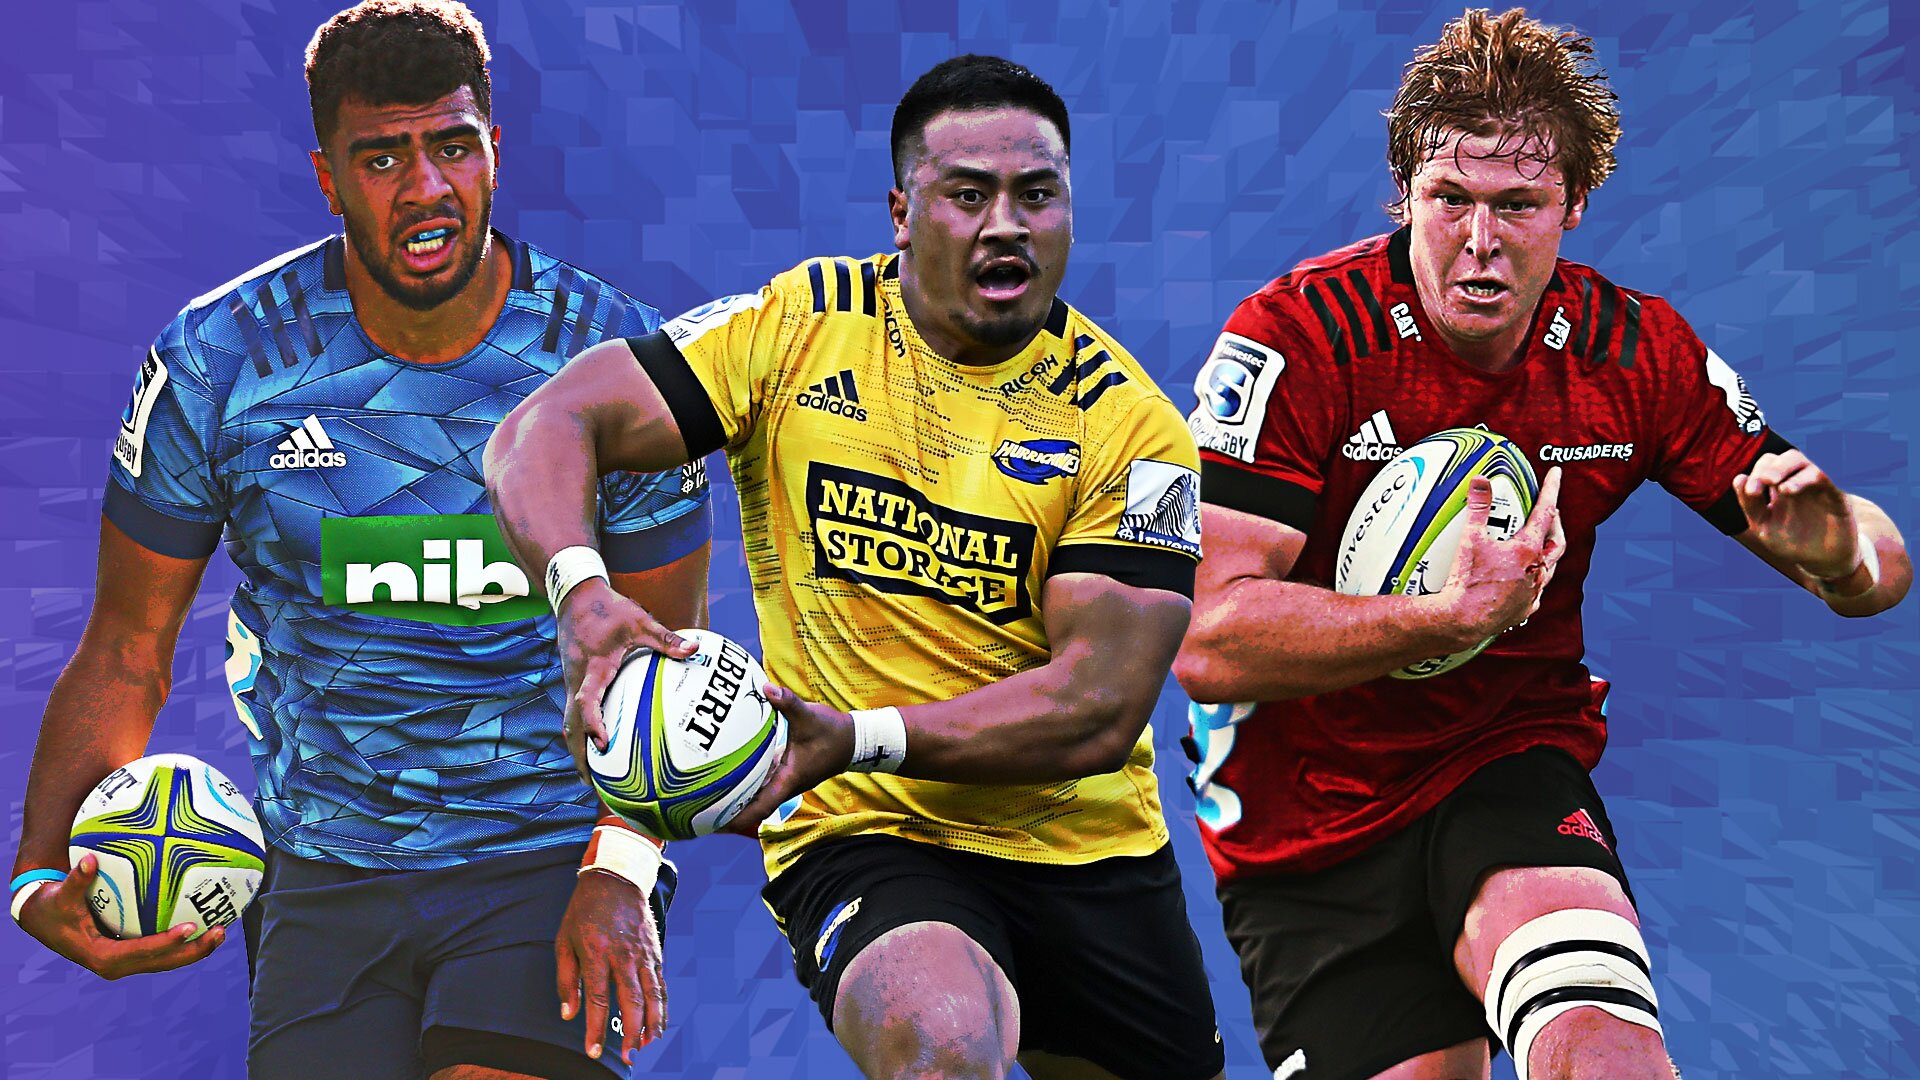 With Super Rugby possibly reaching an end, who has done enough to earn selection in Ian Foster's first All Blacks squad?